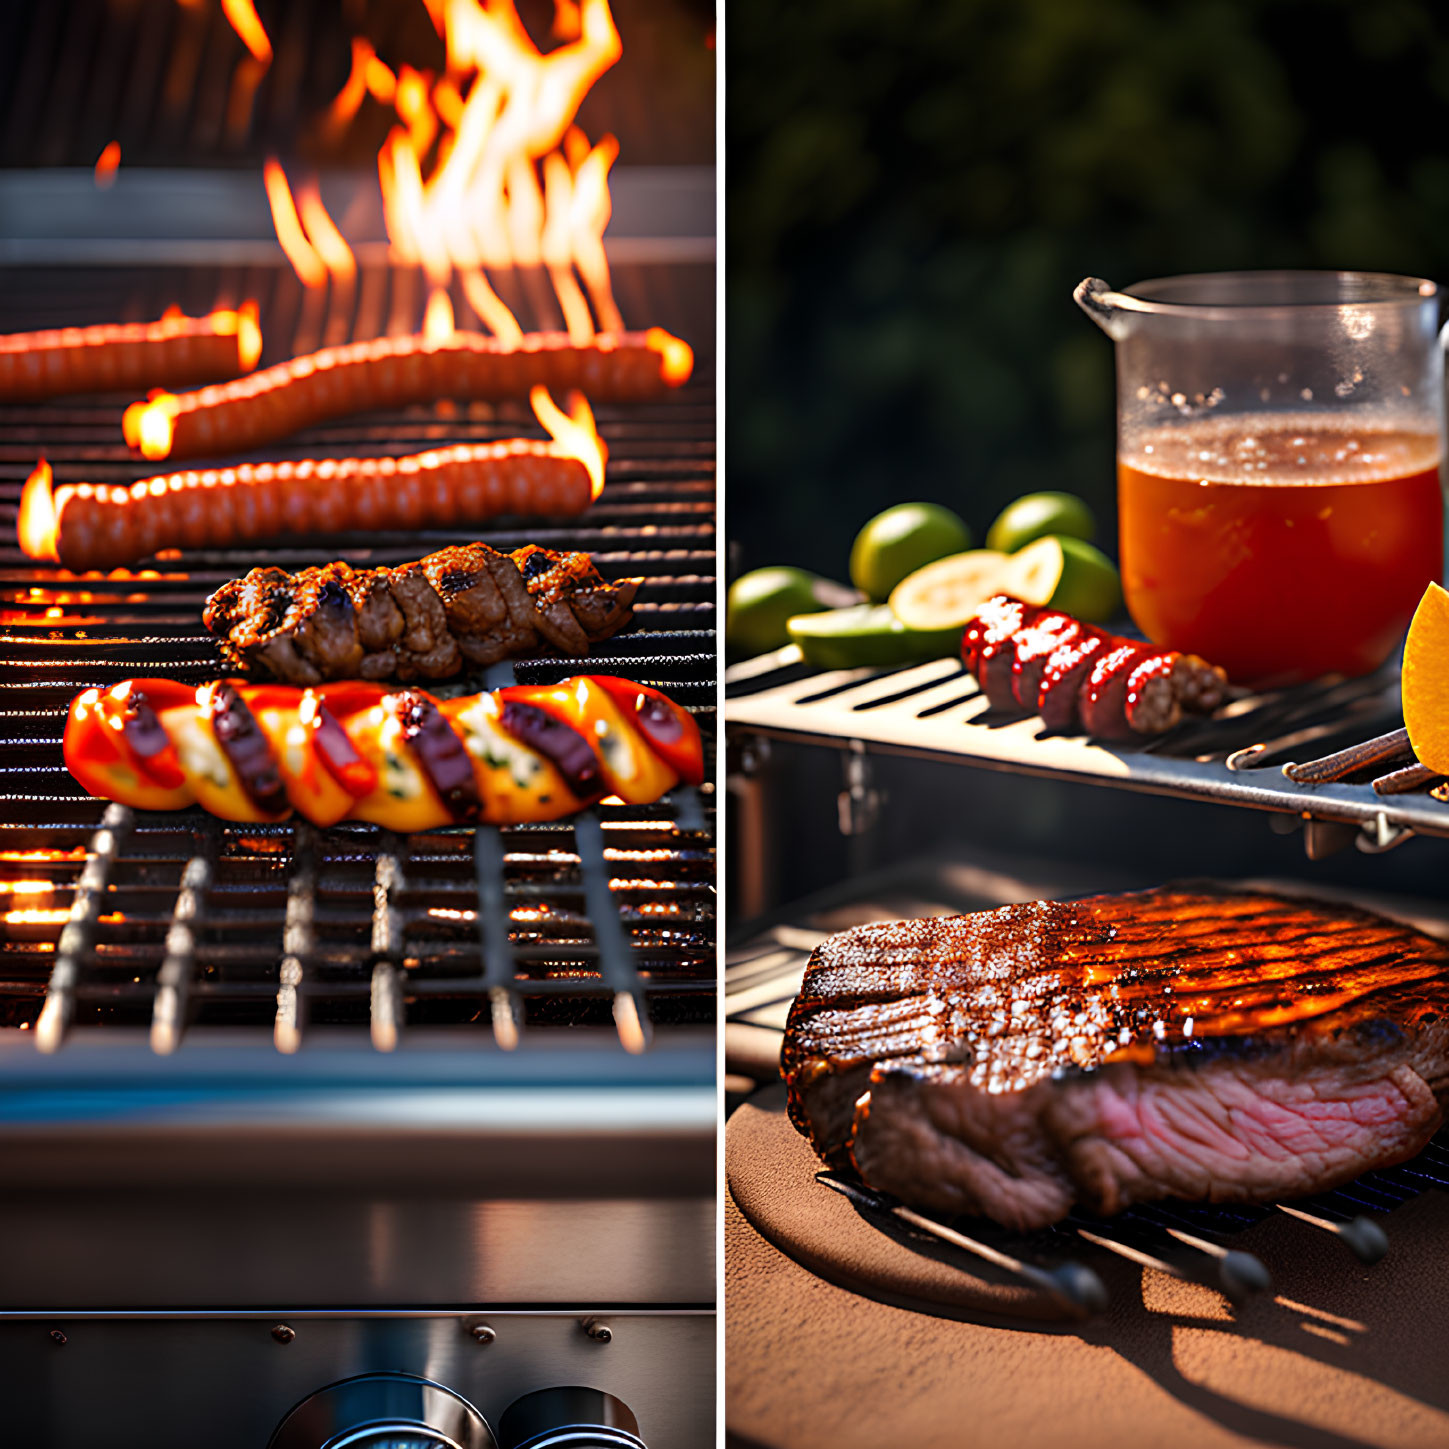 BBQ Collage with Sausages, Skewers, Seared Steak, and Citrus